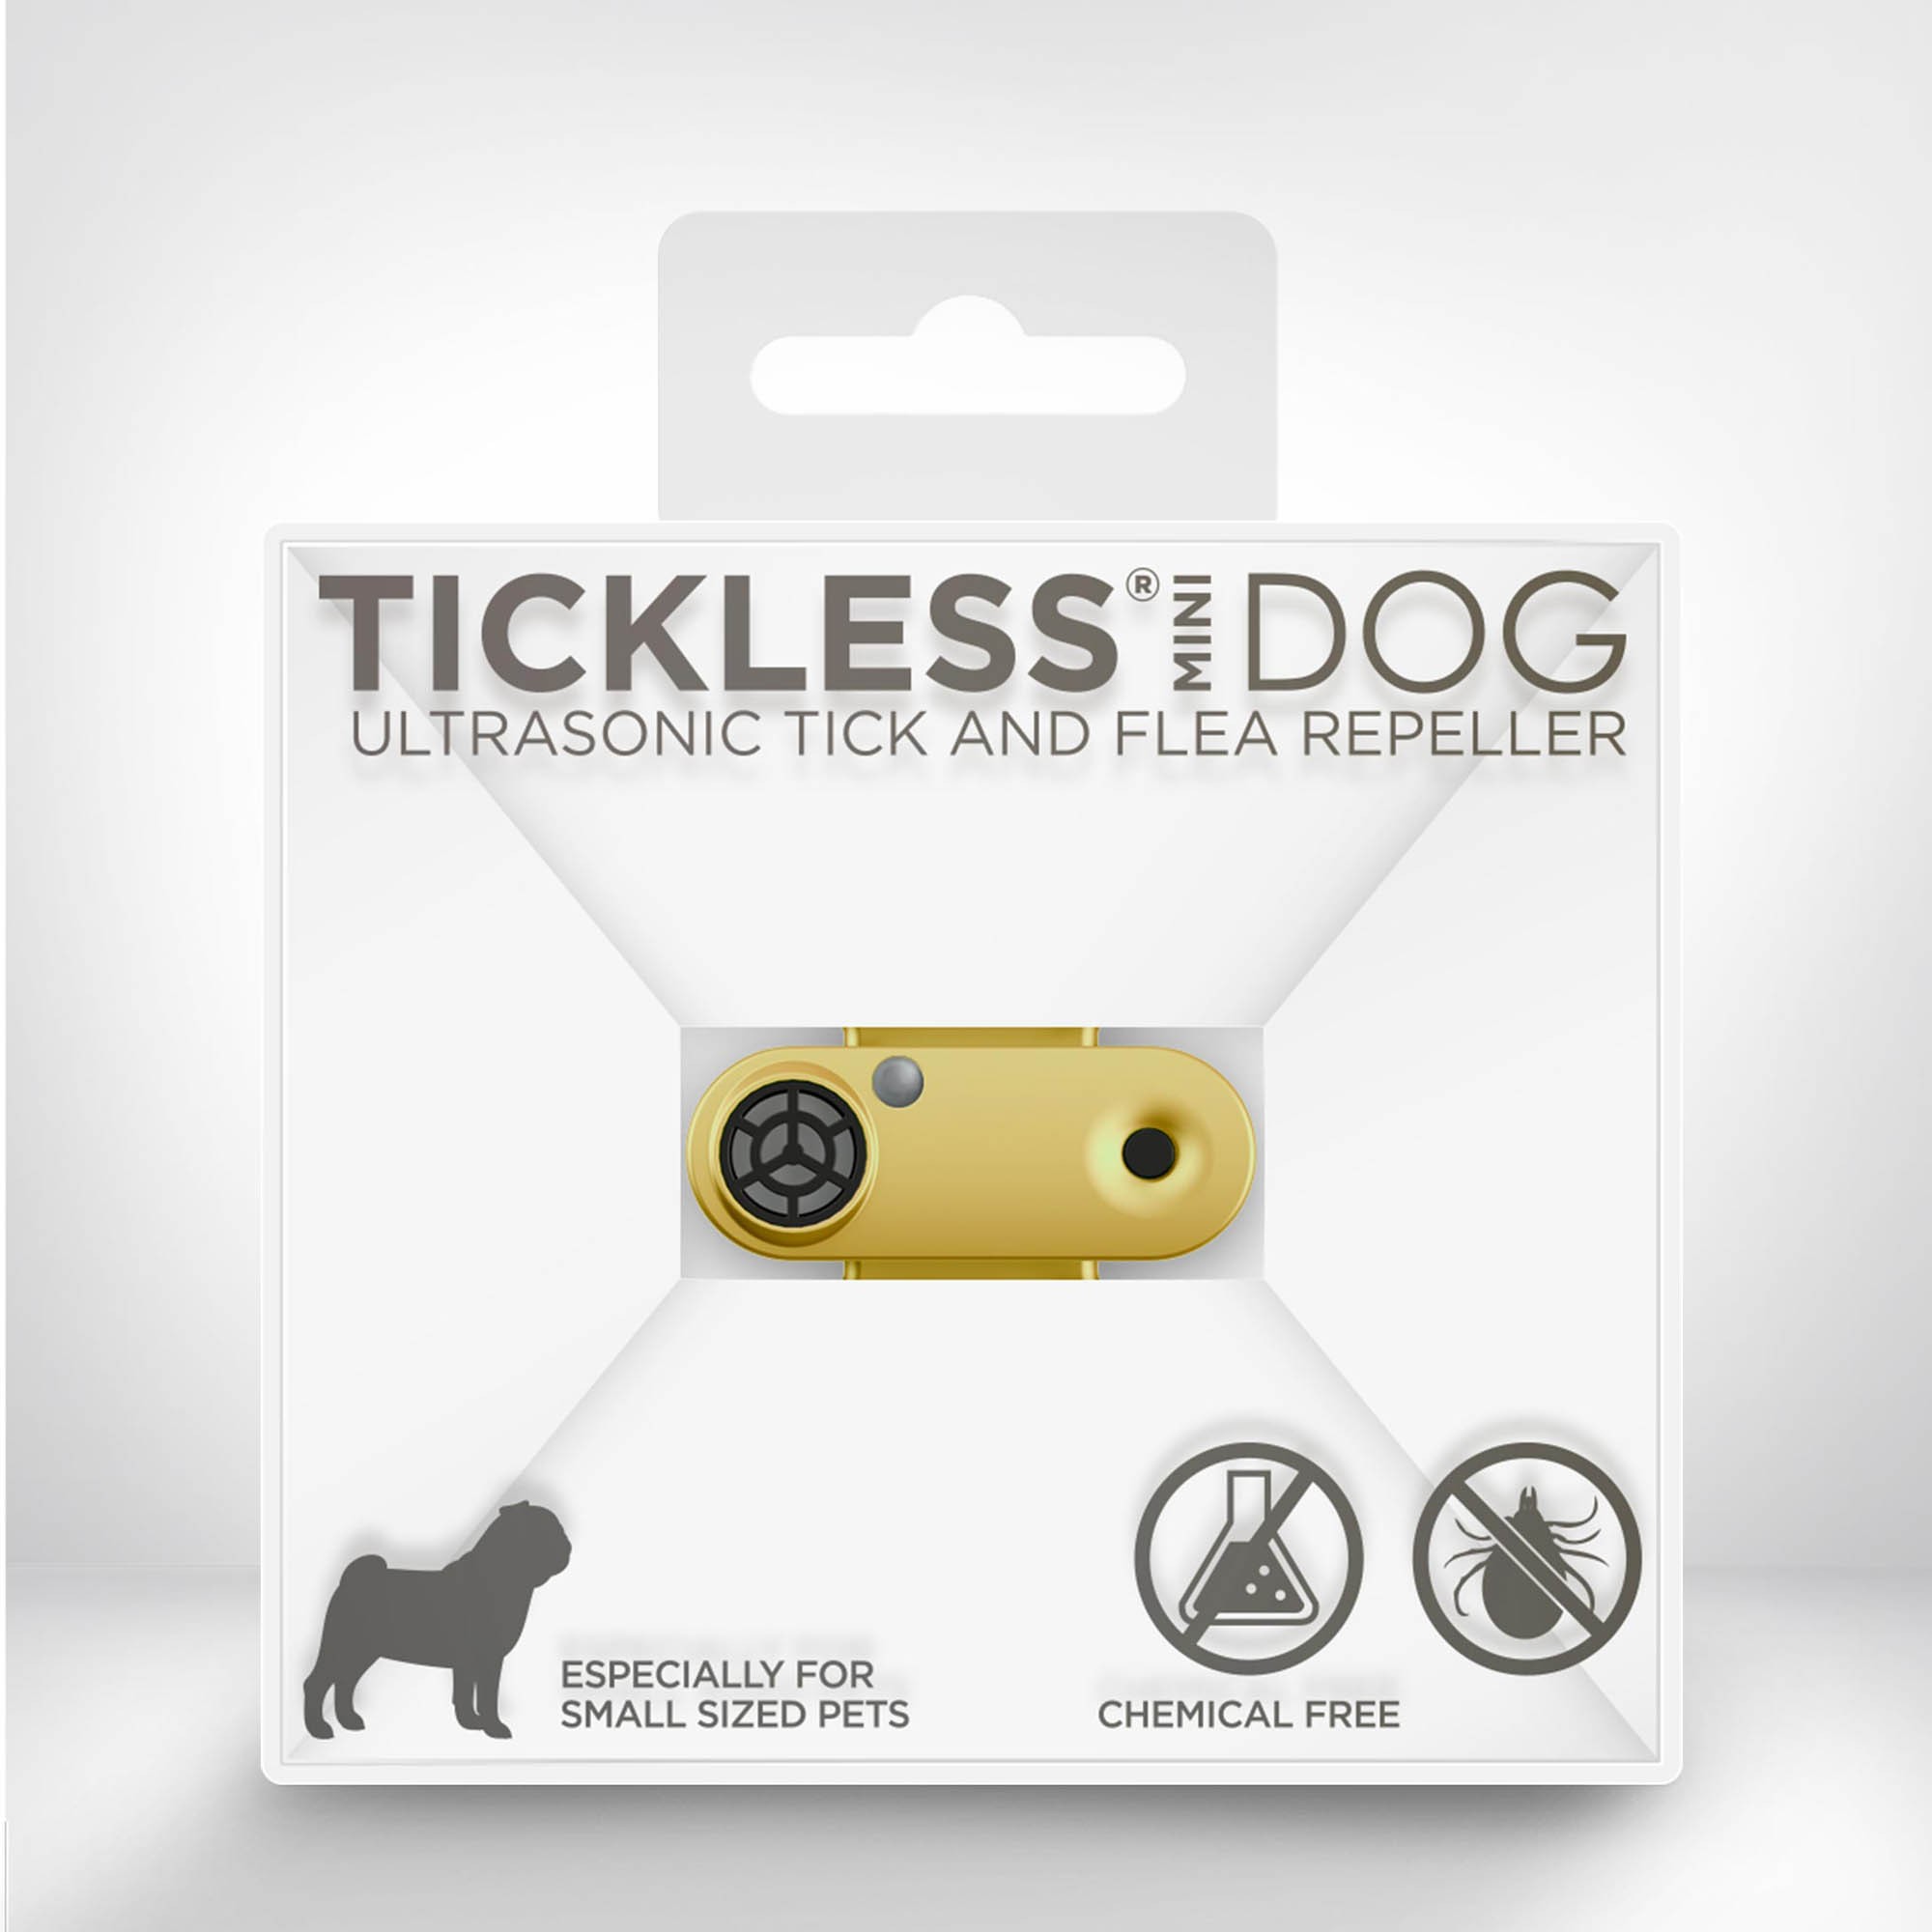 Répulsif TICKLESS Mini Dog rechargeable - Or, MADE IN CHASSE - Equipements de chasse